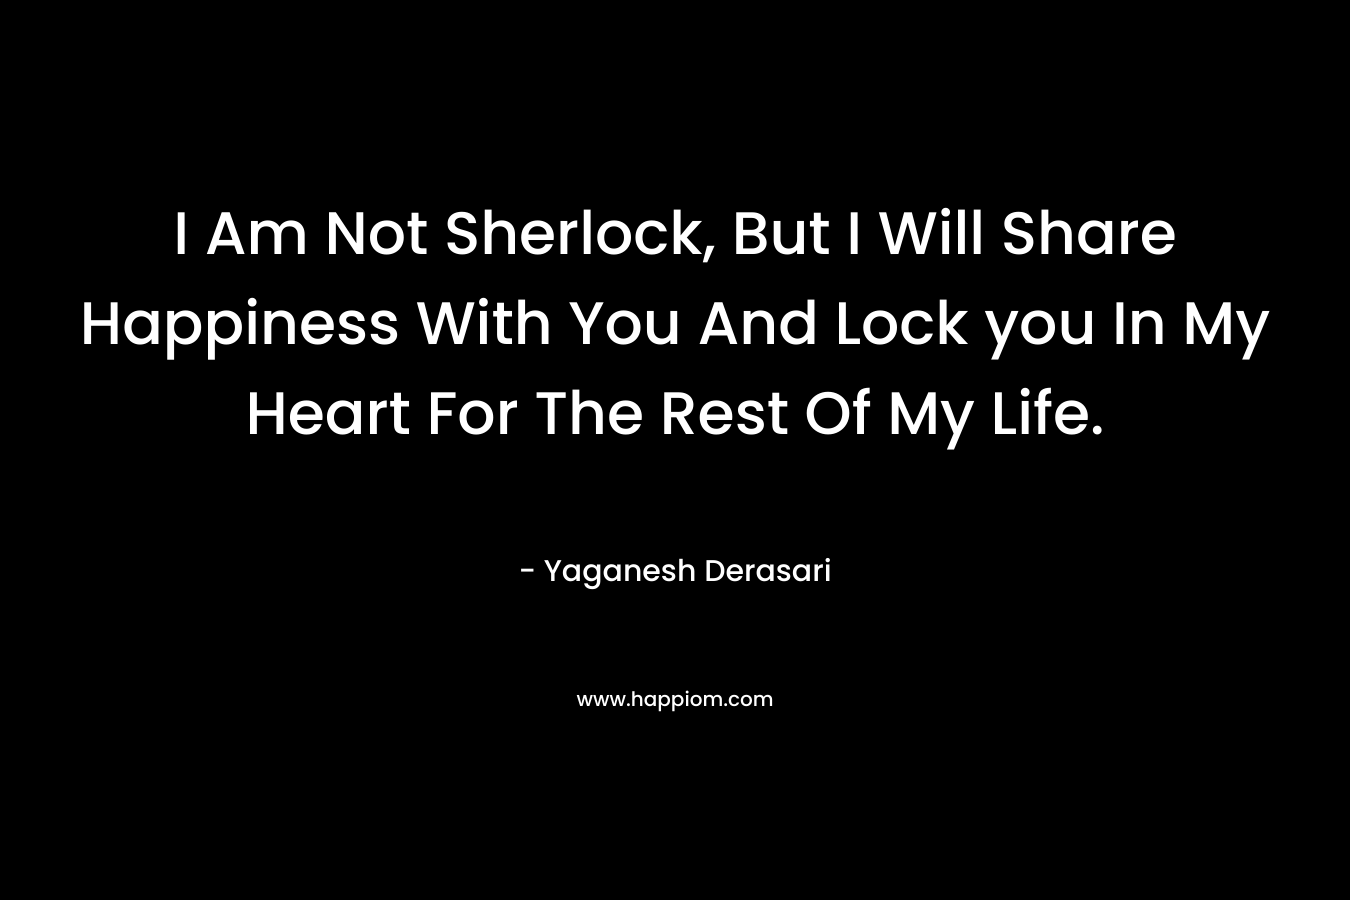 I Am Not Sherlock, But I Will Share Happiness With You And Lock you In My Heart For The Rest Of My Life. – Yaganesh Derasari